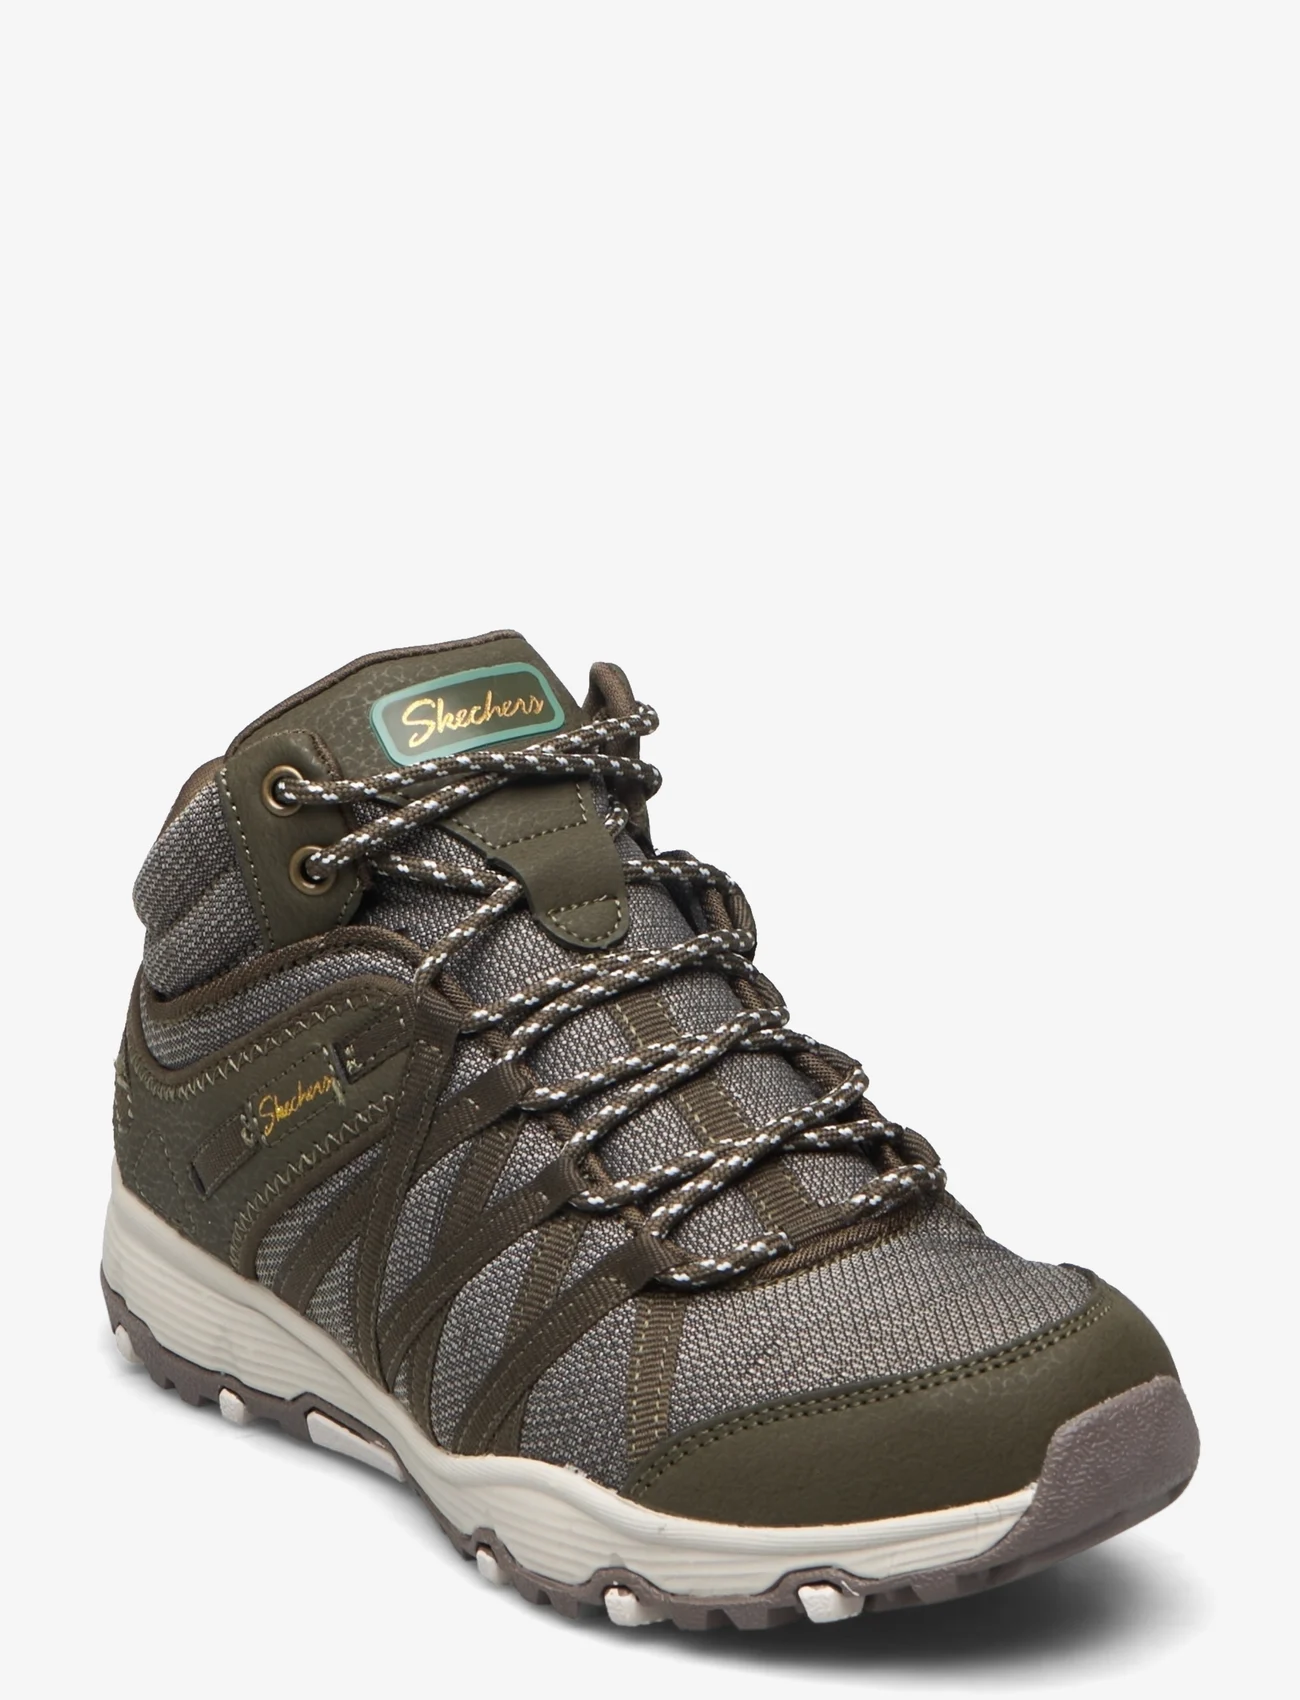 Skechers - Womens Seager Hiker Side to Side -Water Repellent - hiking shoes - olv olive - 0